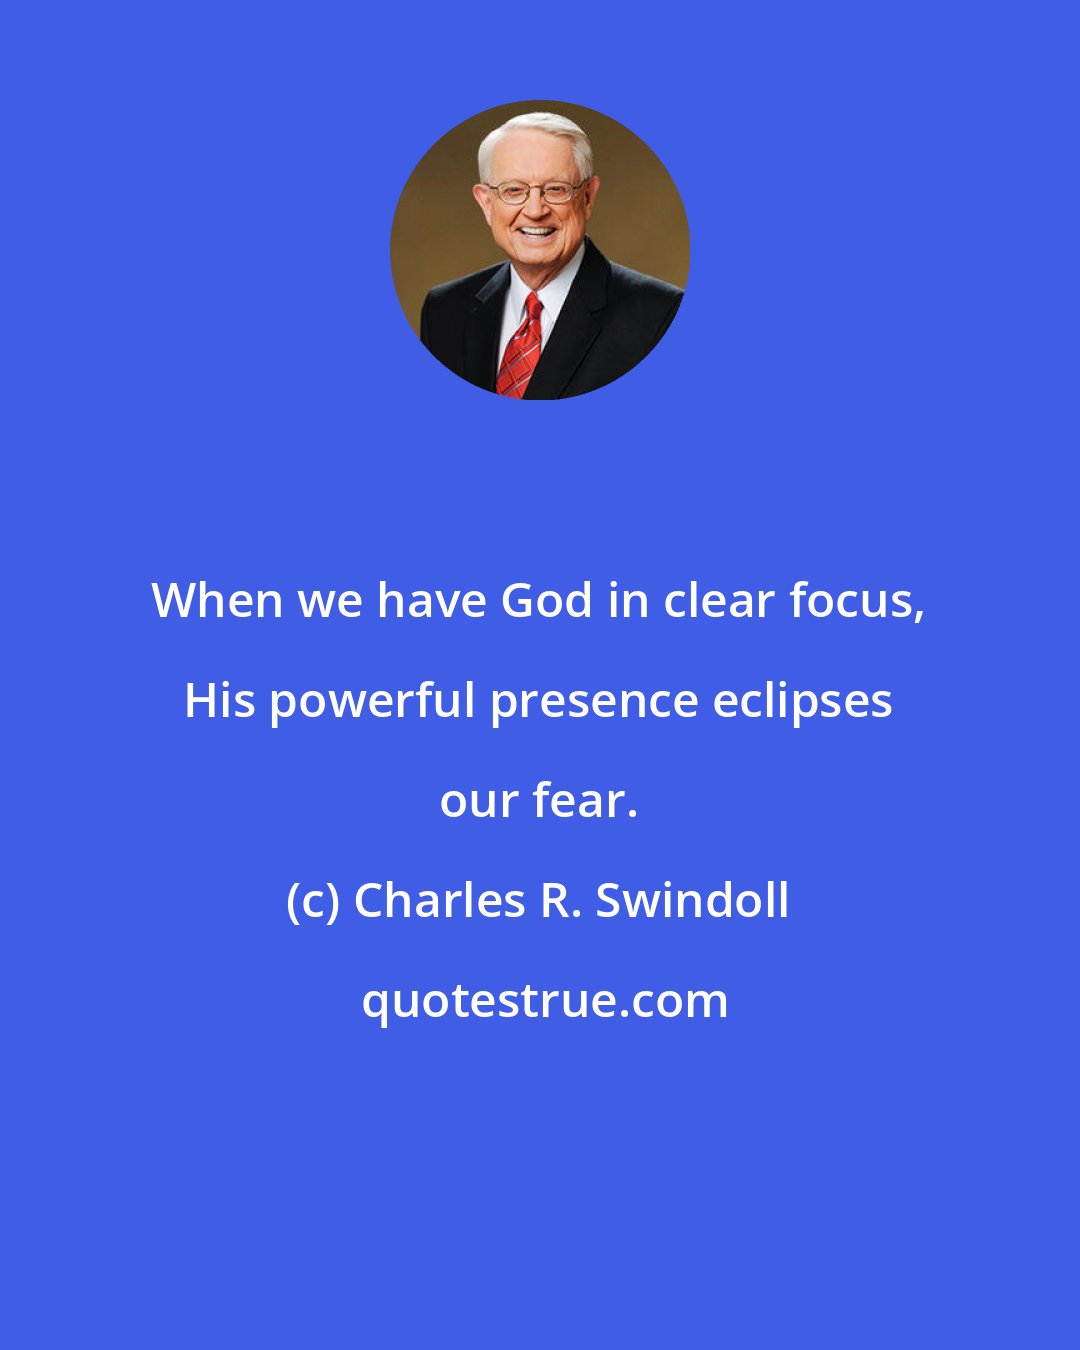 Charles R. Swindoll: When we have God in clear focus, His powerful presence eclipses our fear.